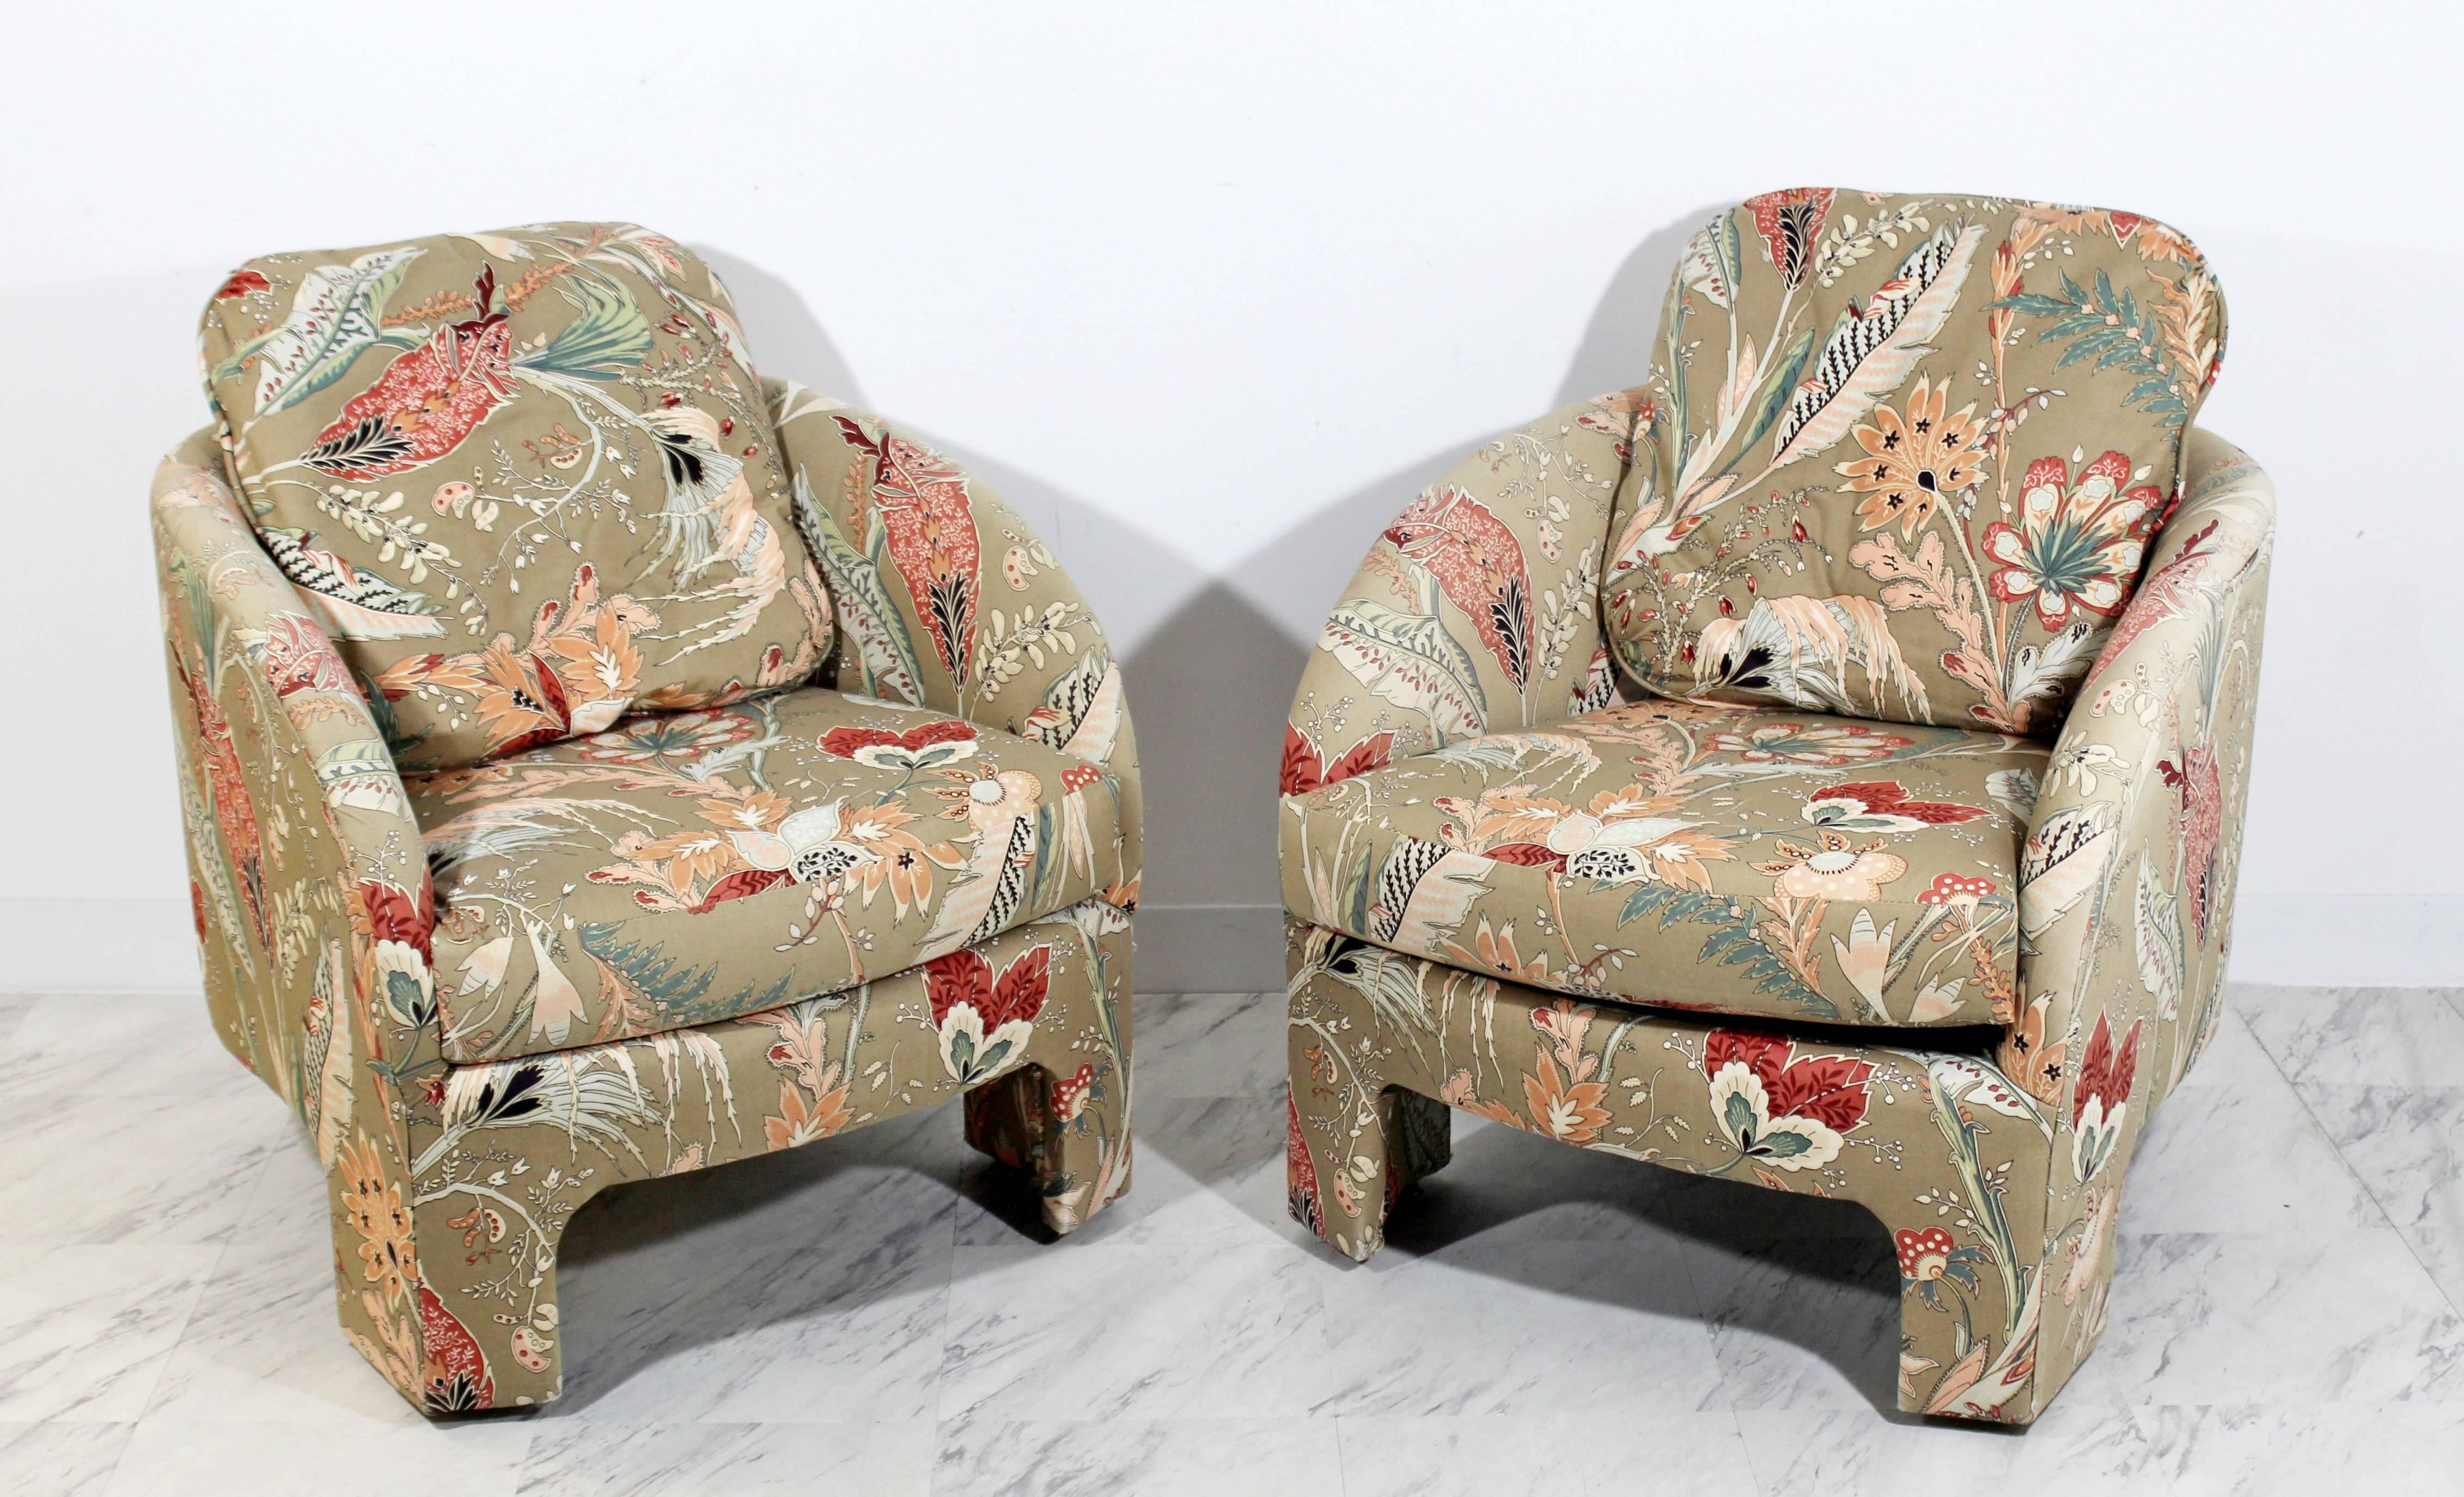 For your consideration is a gorgeous pair of architectural three-legged tub lounge arm chairs, with a floral upholstery, designed by Milo Baughman in the 1960s. In excellent condition. The dimensions are 27